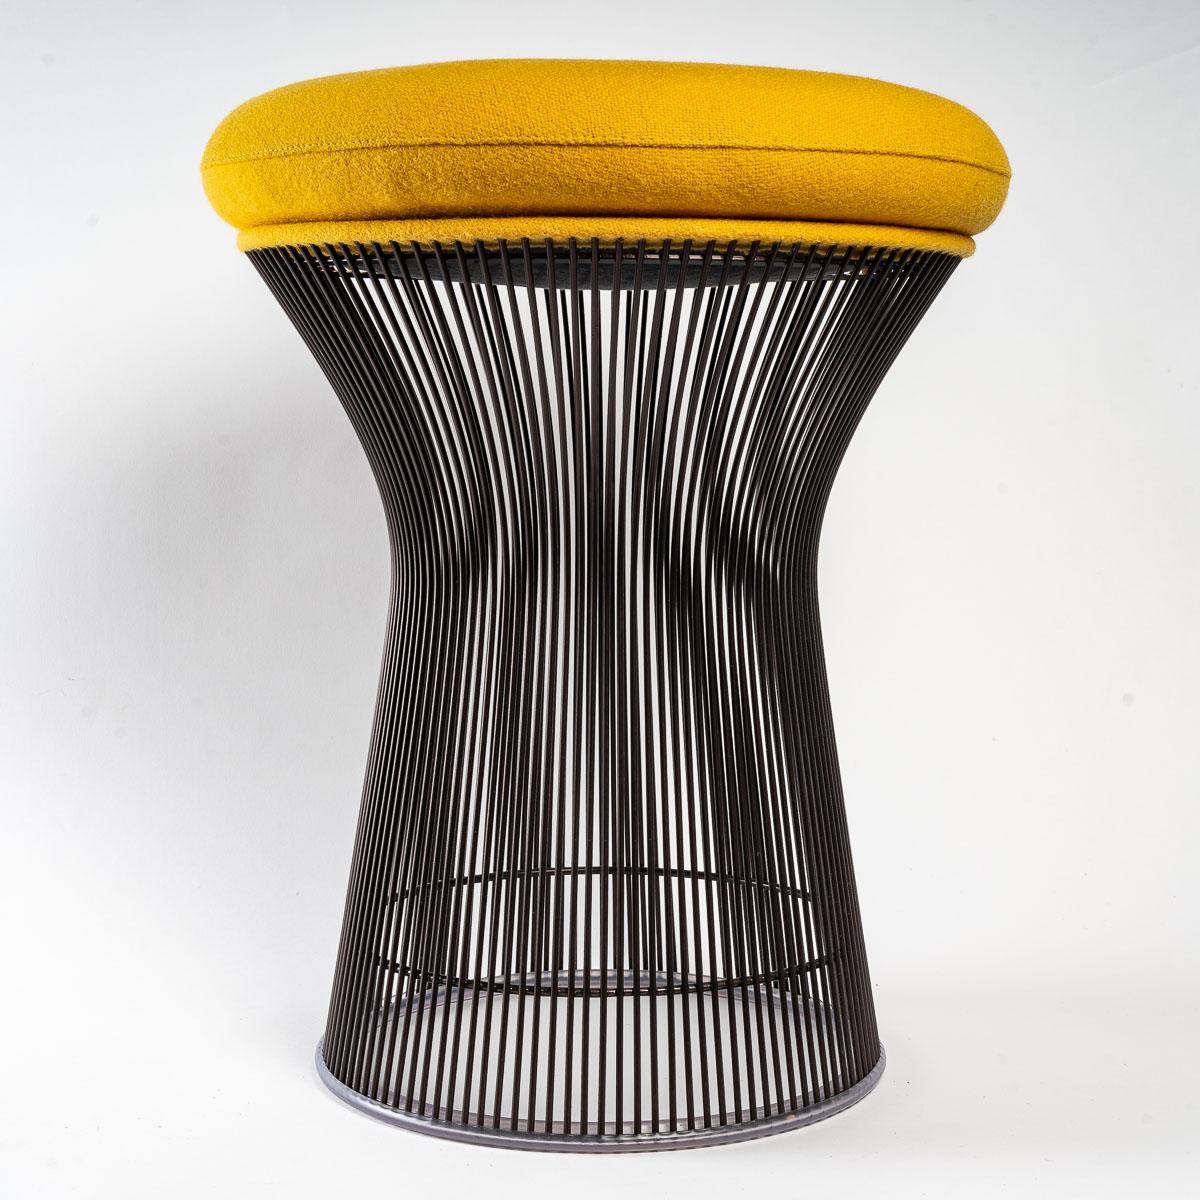 Authentic stool, designed by Warren Platner in 1966.
Recent Knoll edition in yellow Kvadrat Tonus fabrics and bronze metal structure.
Knoll ''K'' fabrics under the seat.

New condition.

H. 54.5cm x D. 44cm

Model still available on order